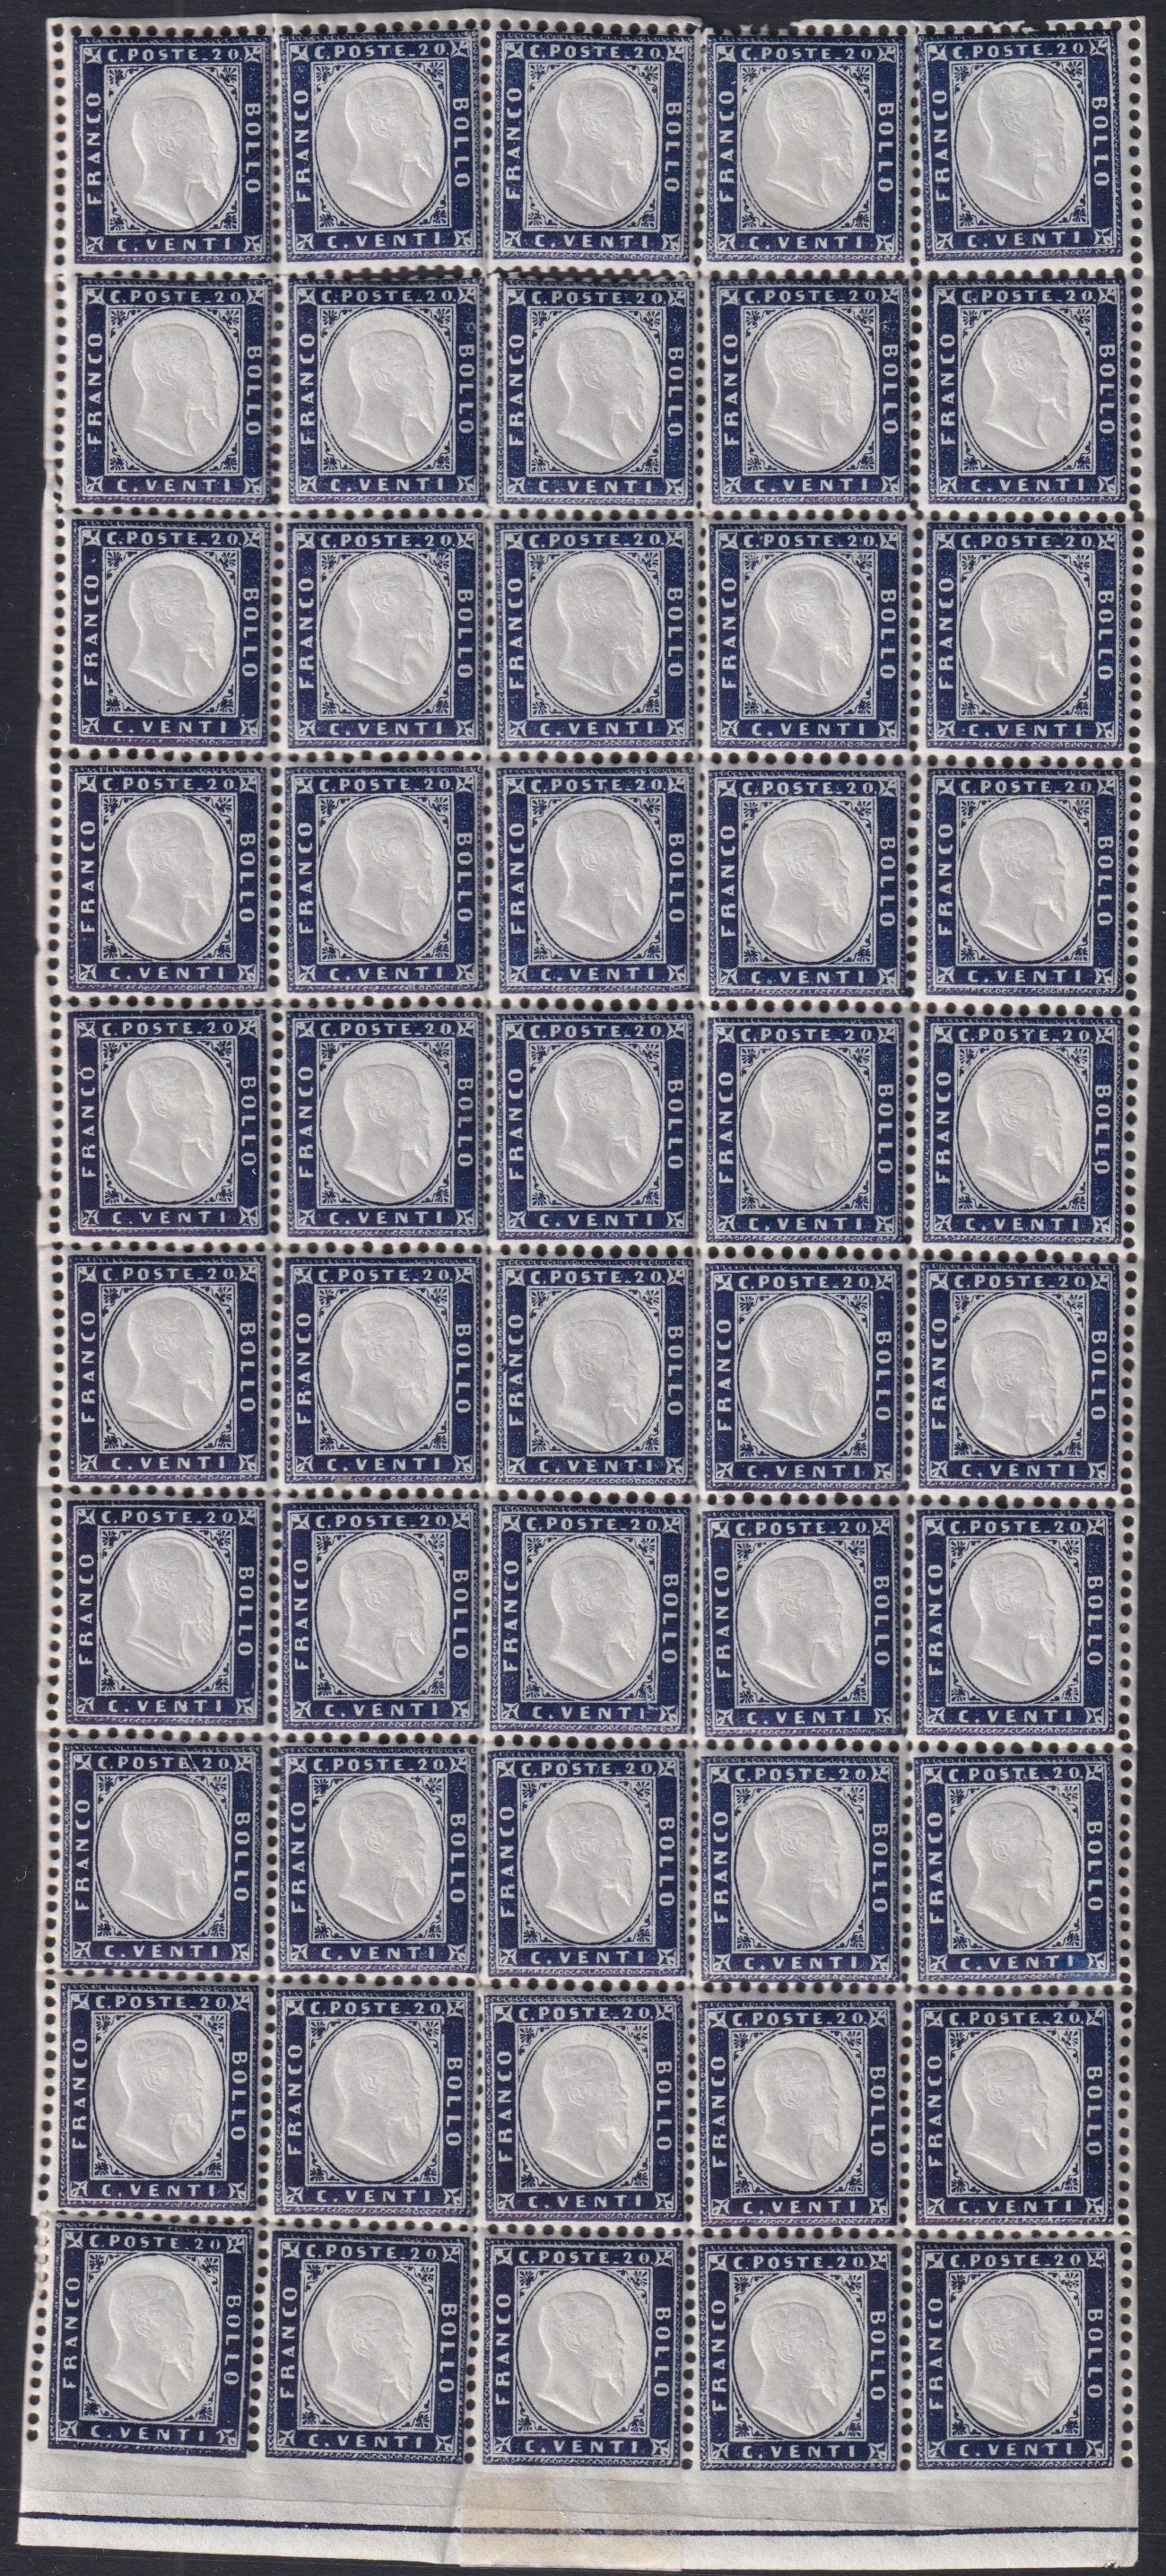 VEIIF1 - 1862 - Vittorio Emanuele II, perforated issue c. 20 indigo with violet reflections, complete sheet of 50 copies with lower box line, new with intact gum and excellent centering. (2nd)